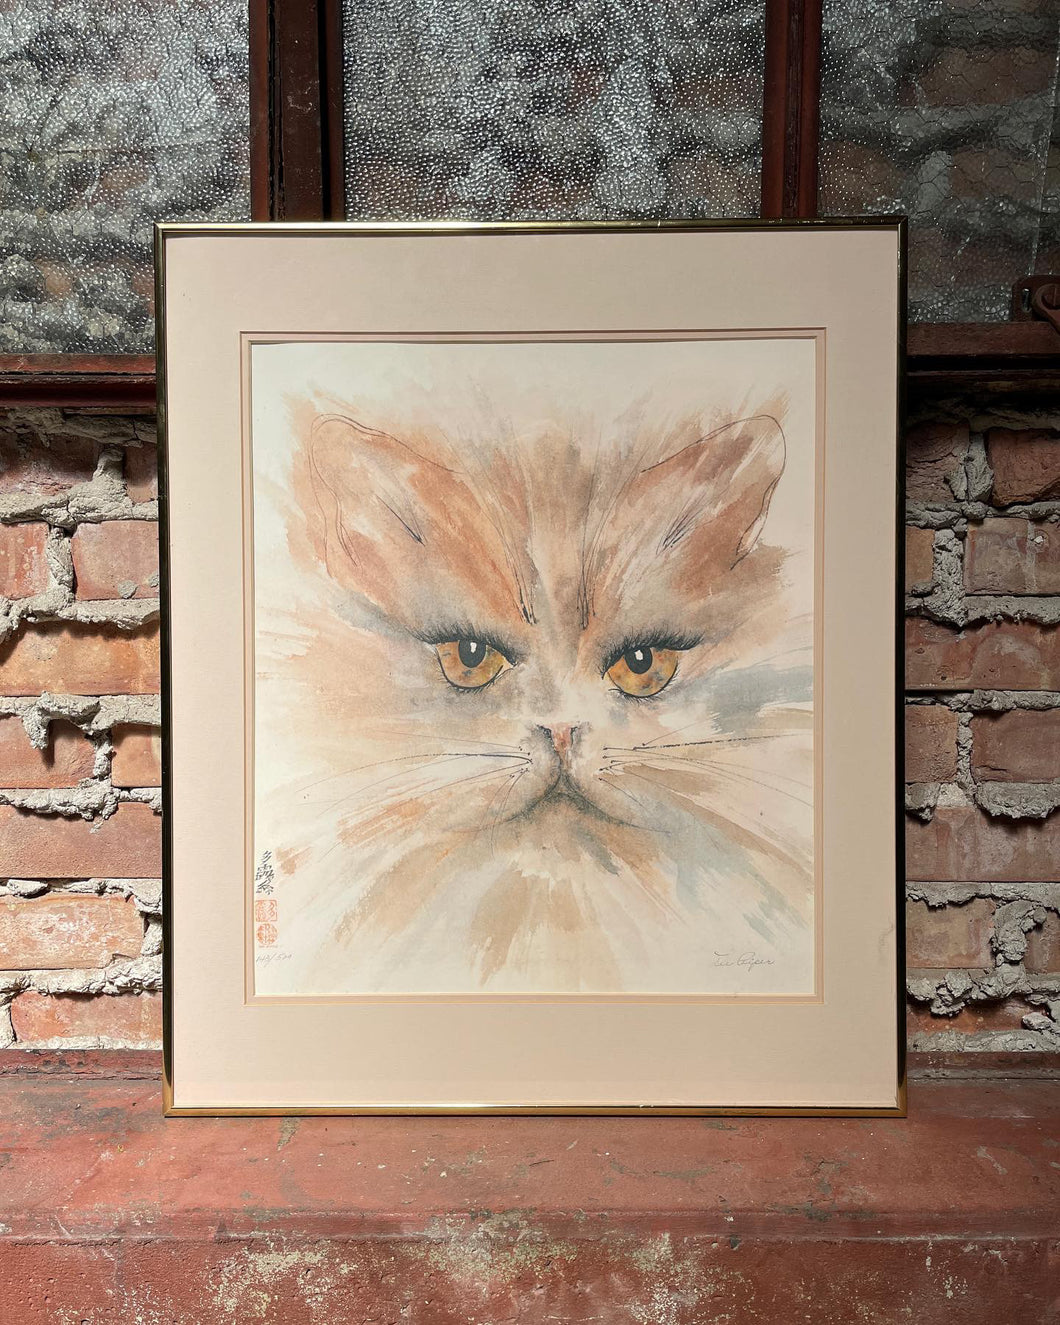 Framed Watercolor Print by Dee Piper